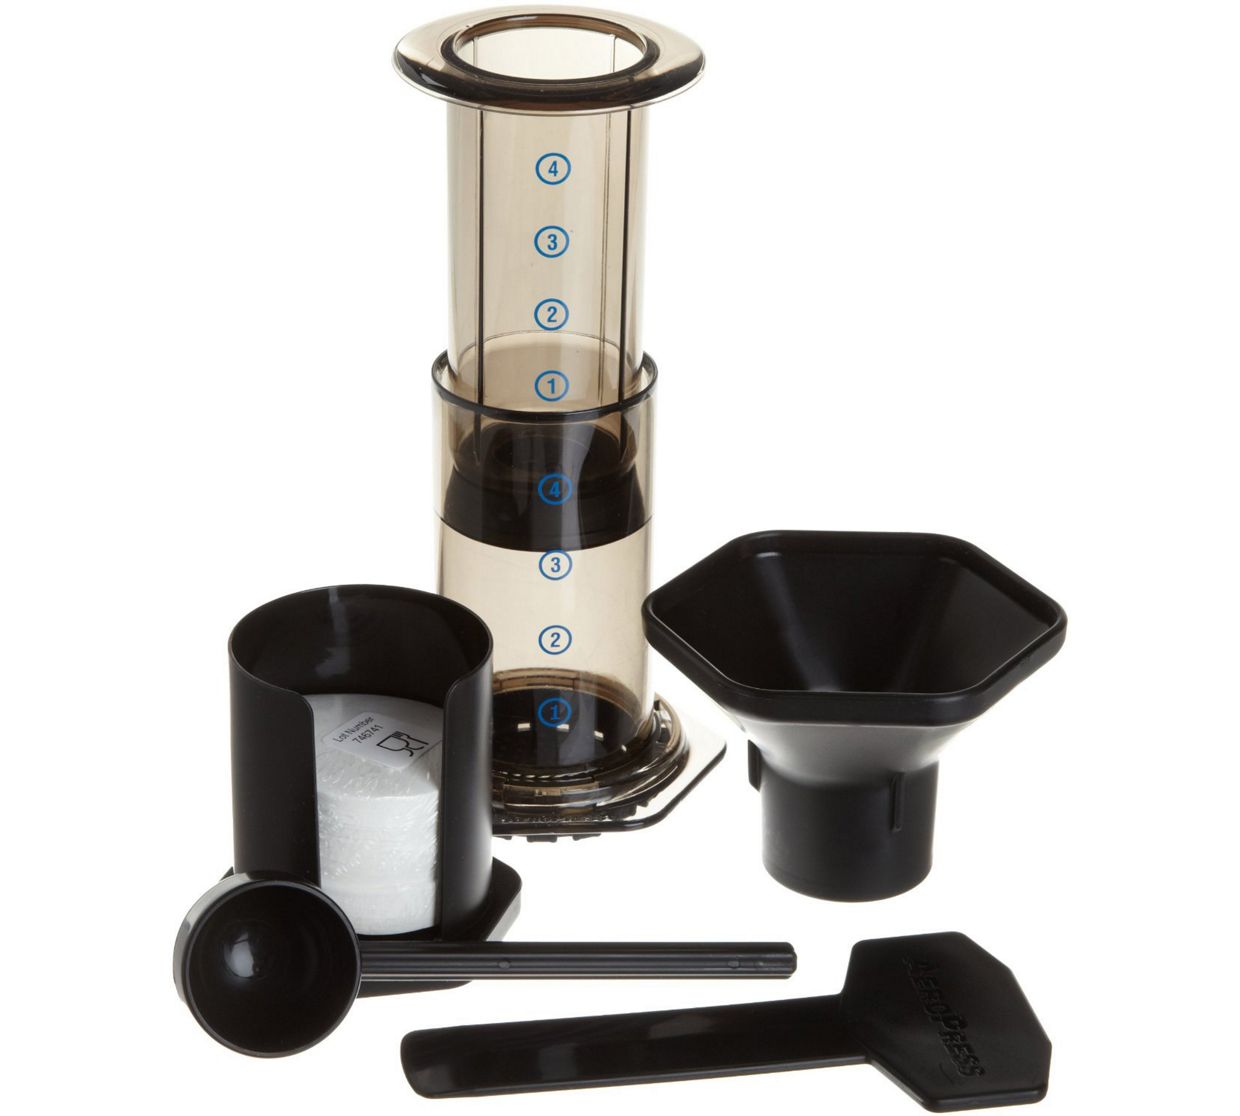 A black plastic aeropress coffee maker with filter paper holder, stirrer, scoop and funnel